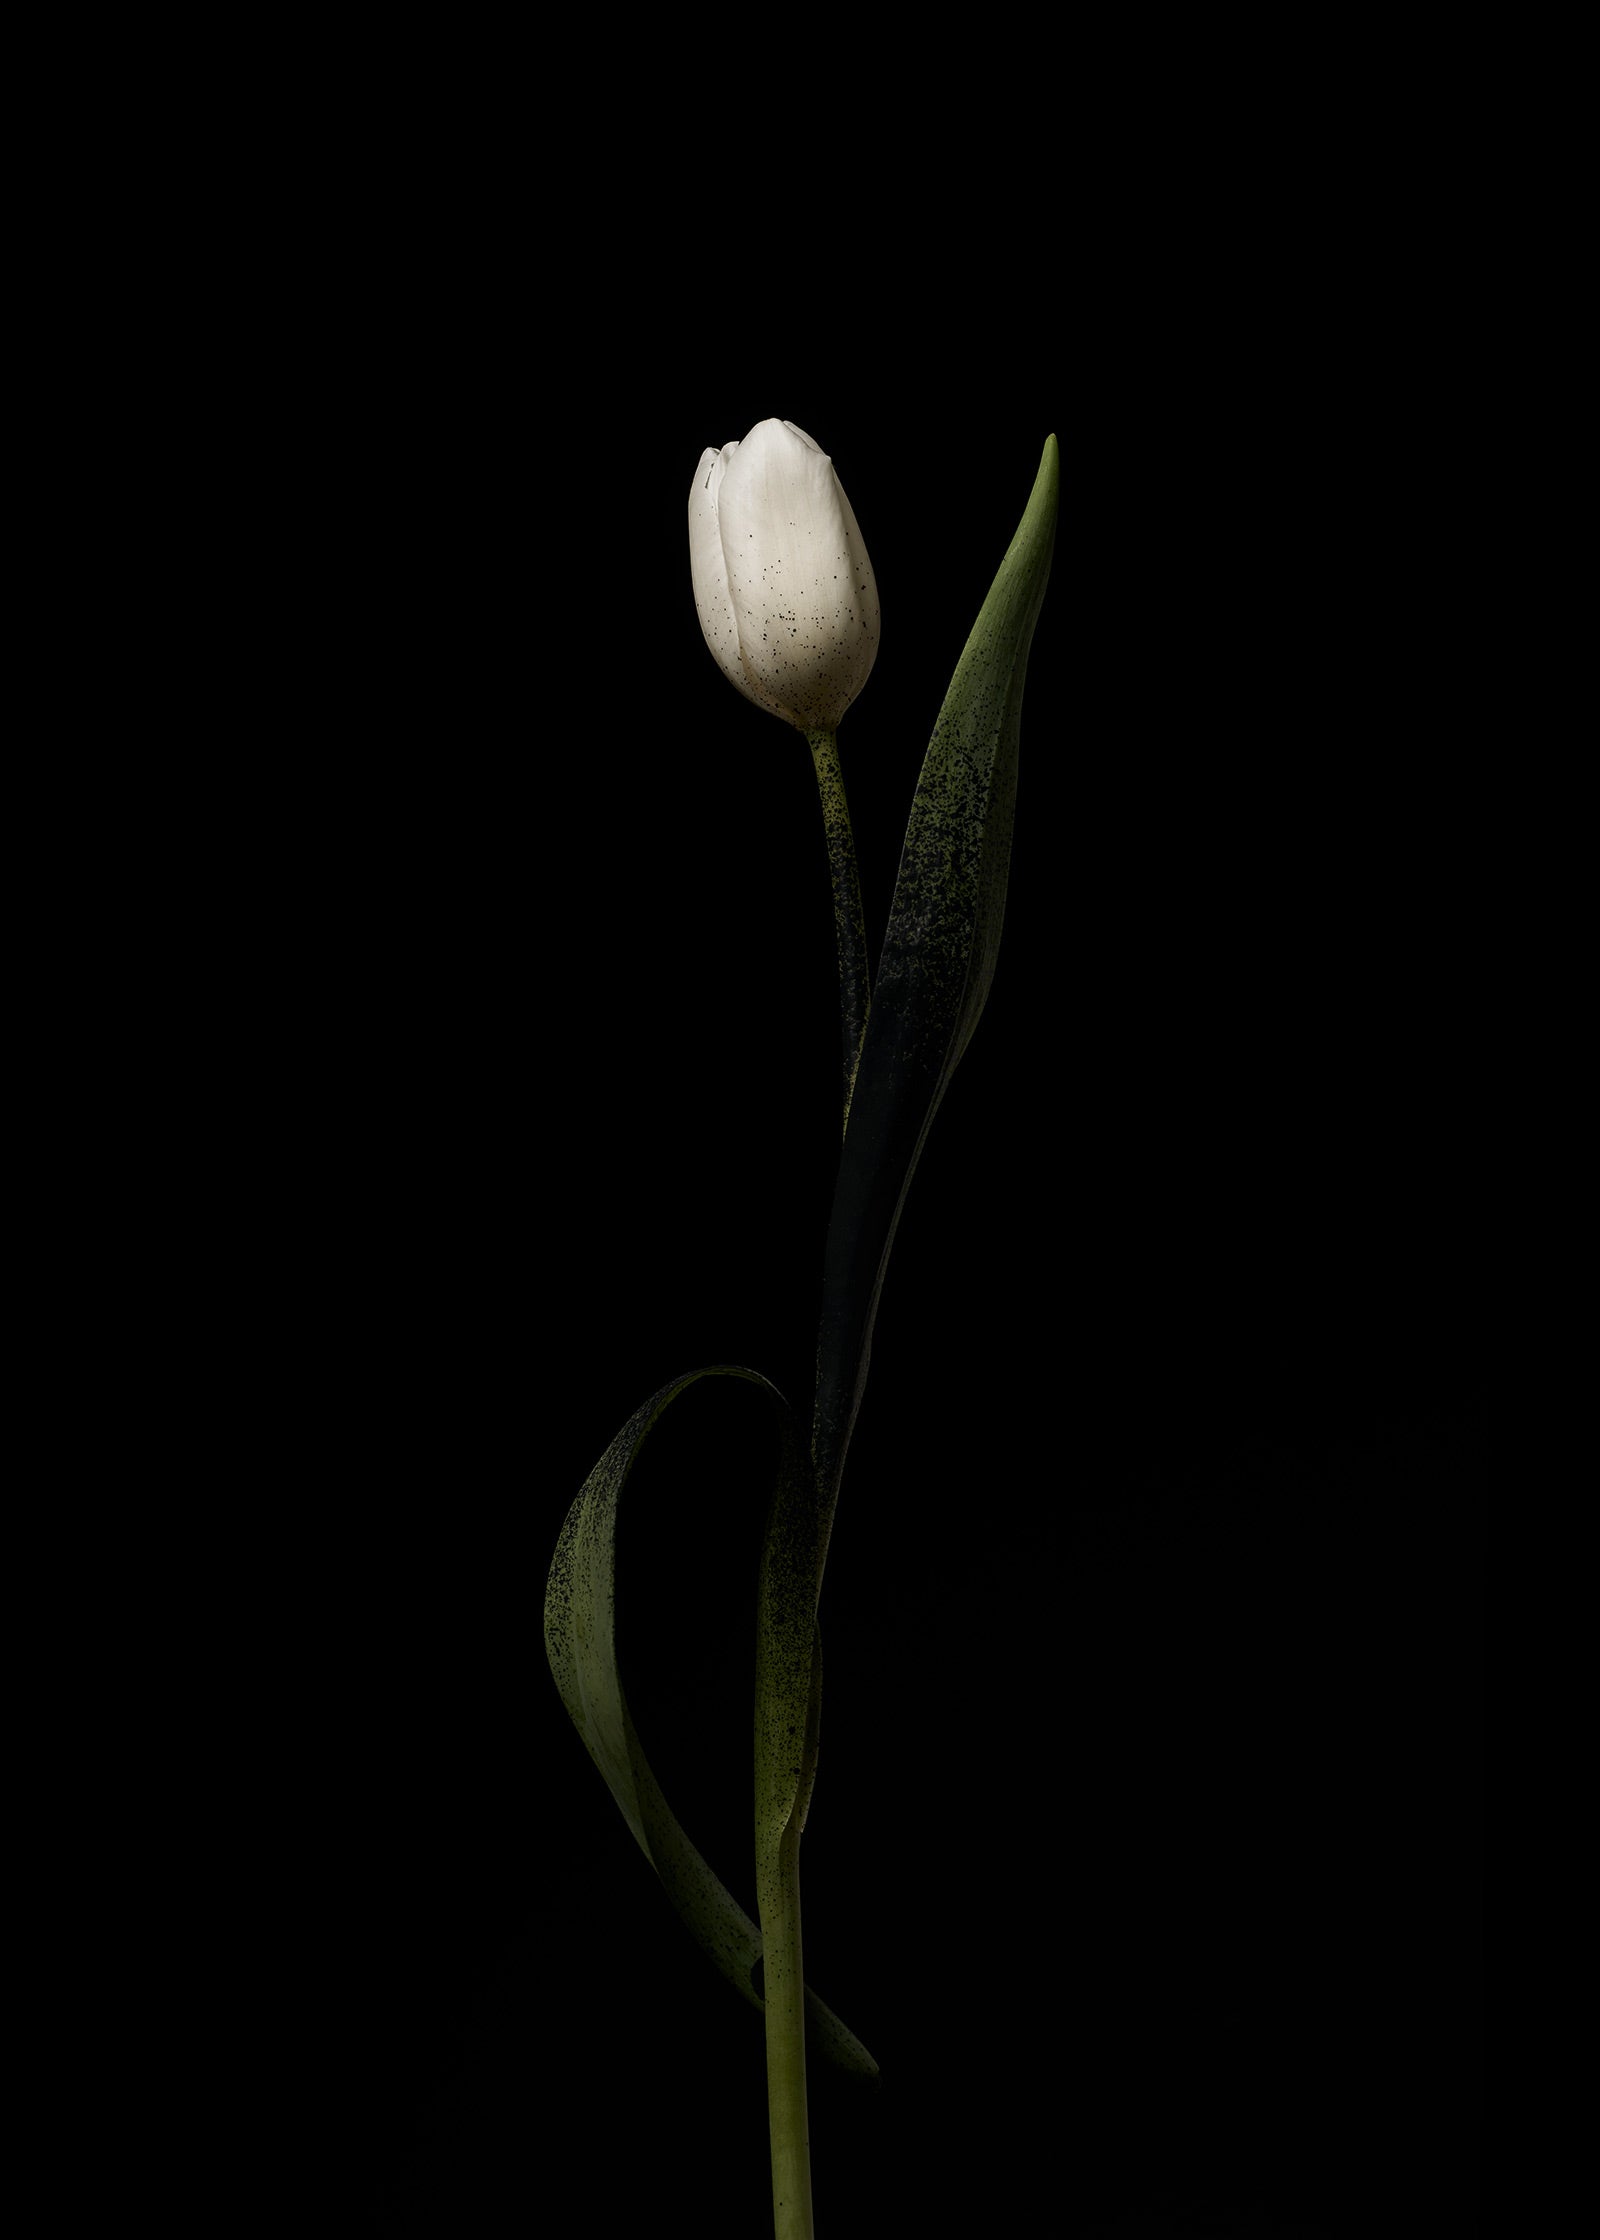 Image of a white tulip with a black background by Gabriela Silveira